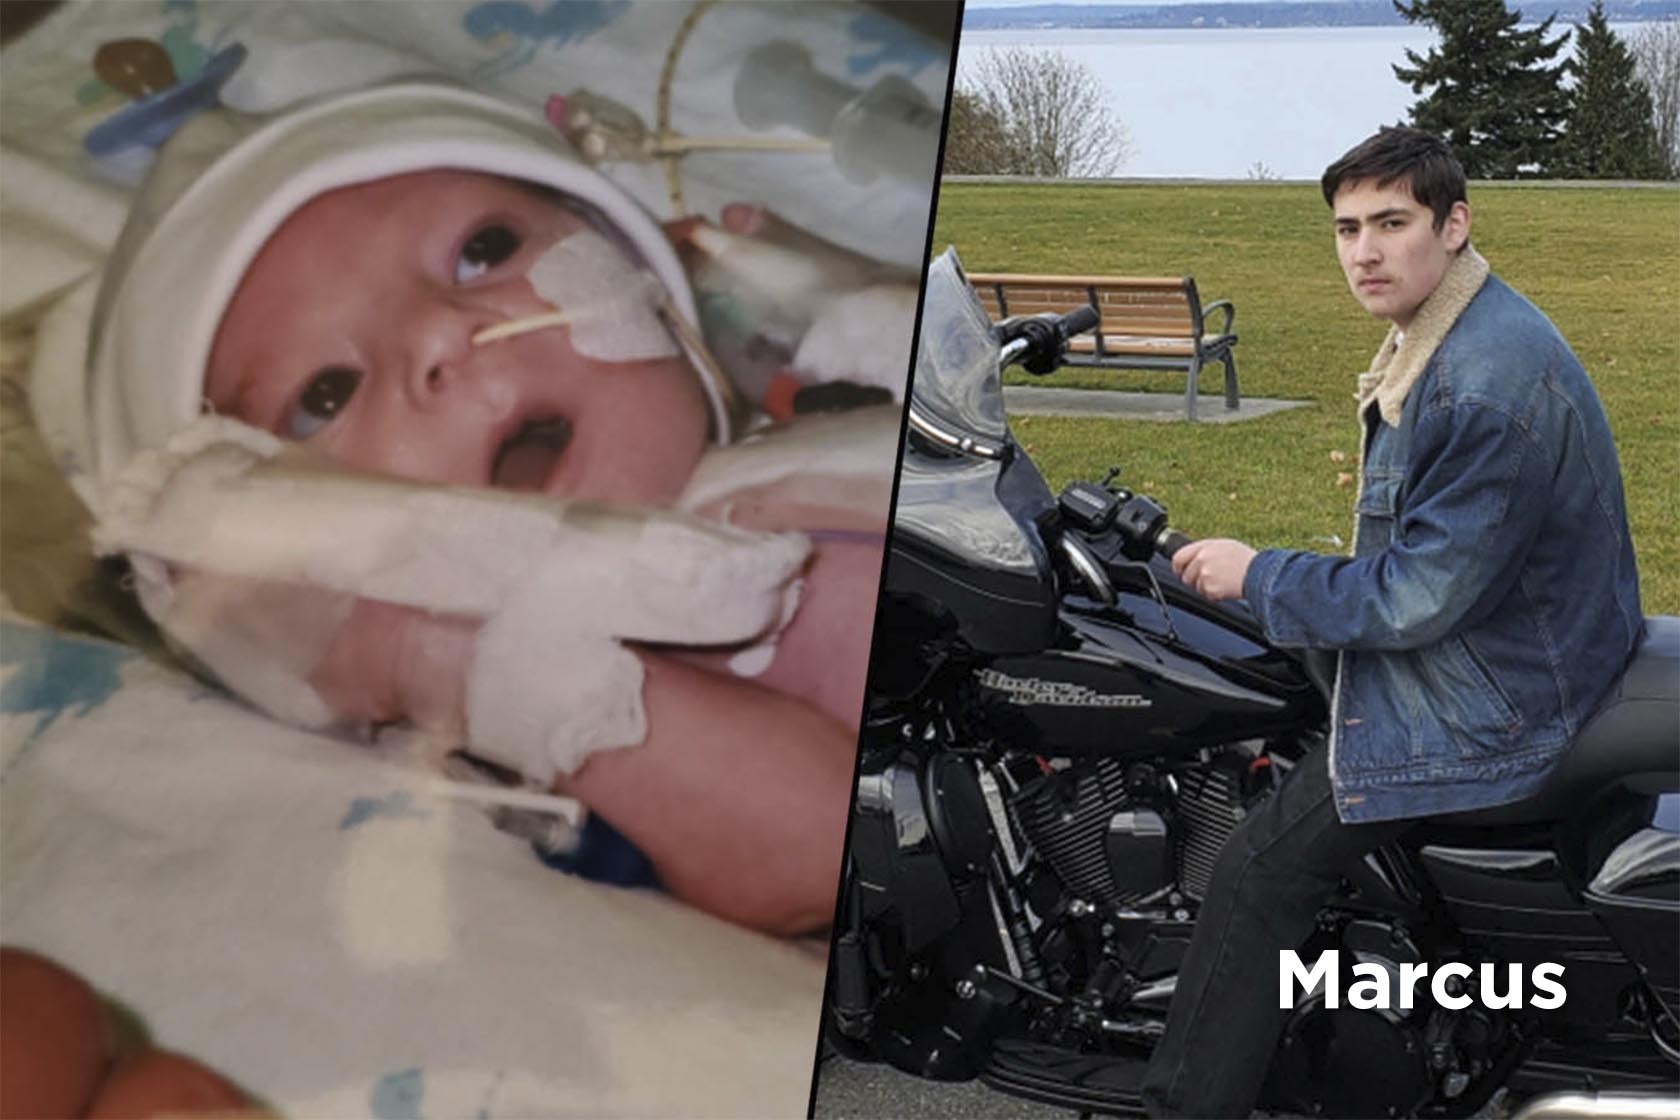 Marcus, a patient treated for a congenital heart defect, shown as a baby and as a teenager